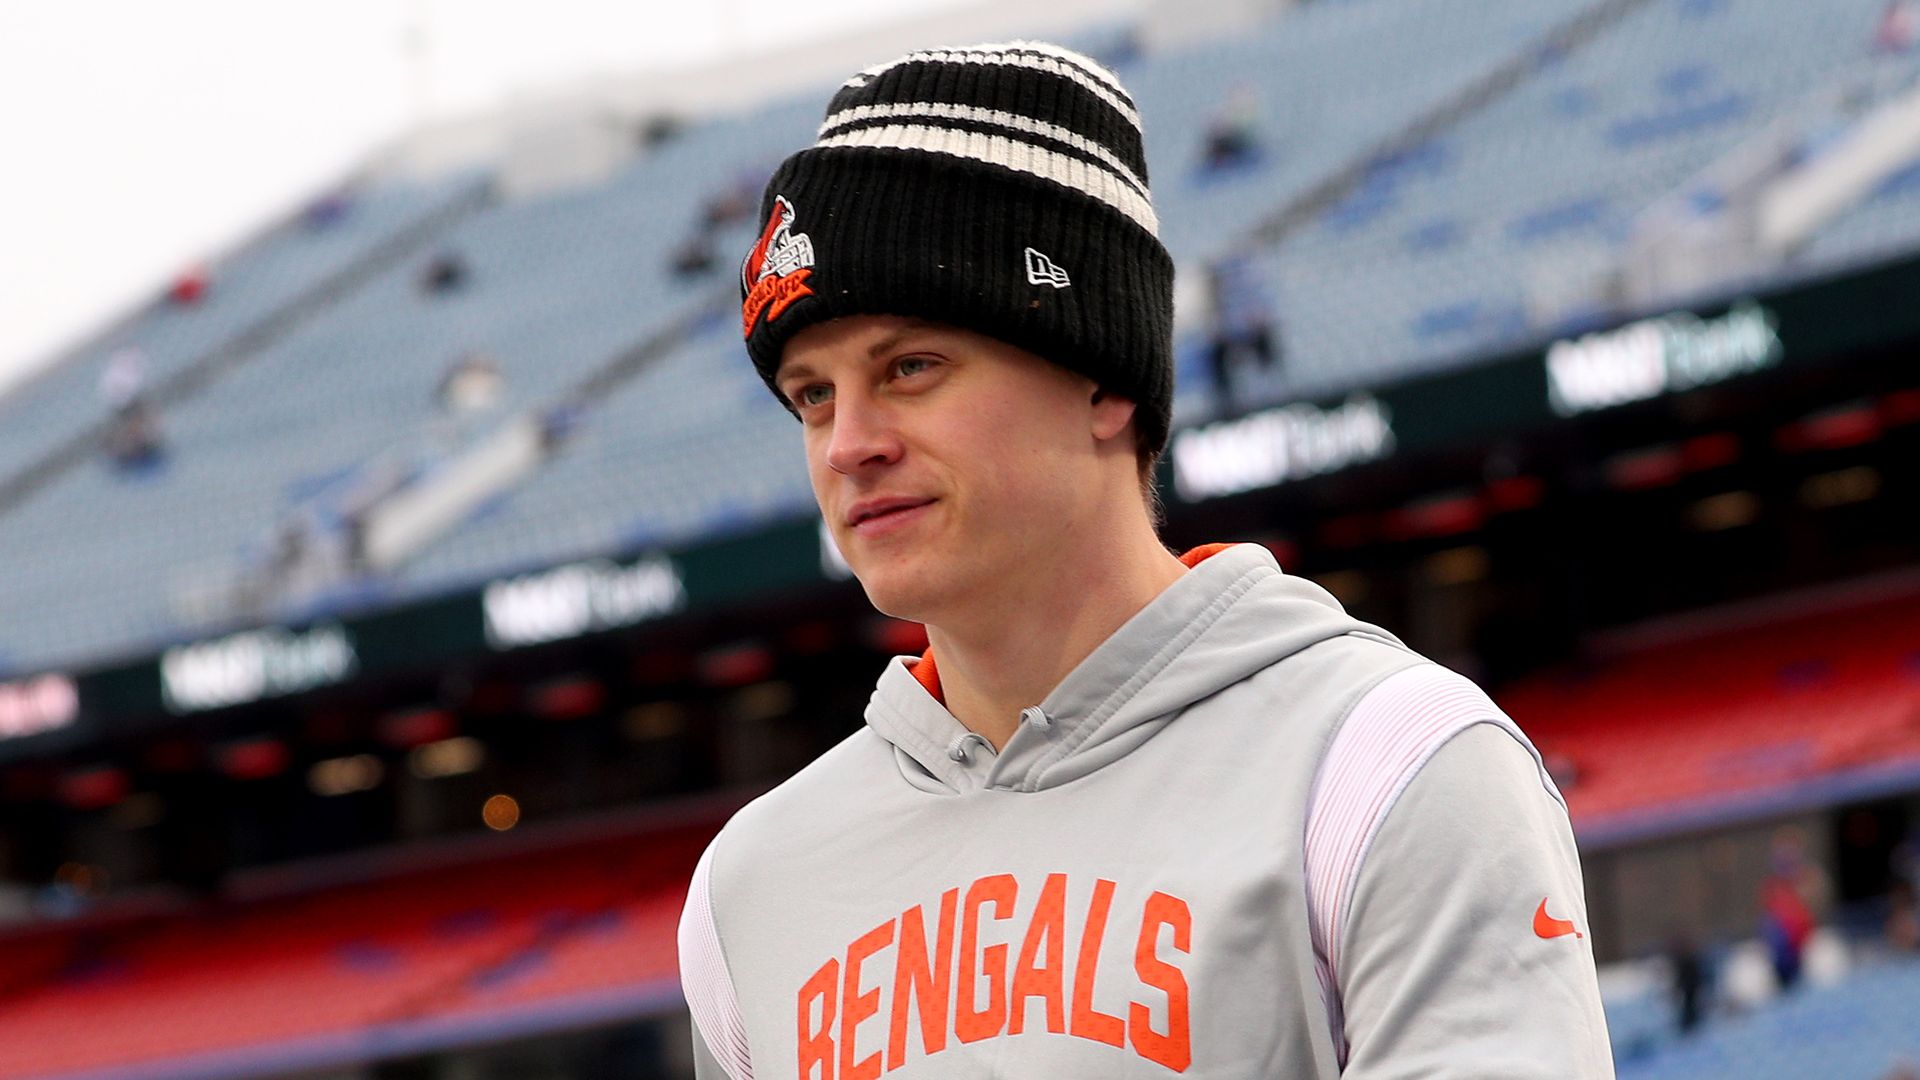 Joe Burrow in a Bengals hoodie before an NFL playoff game. 